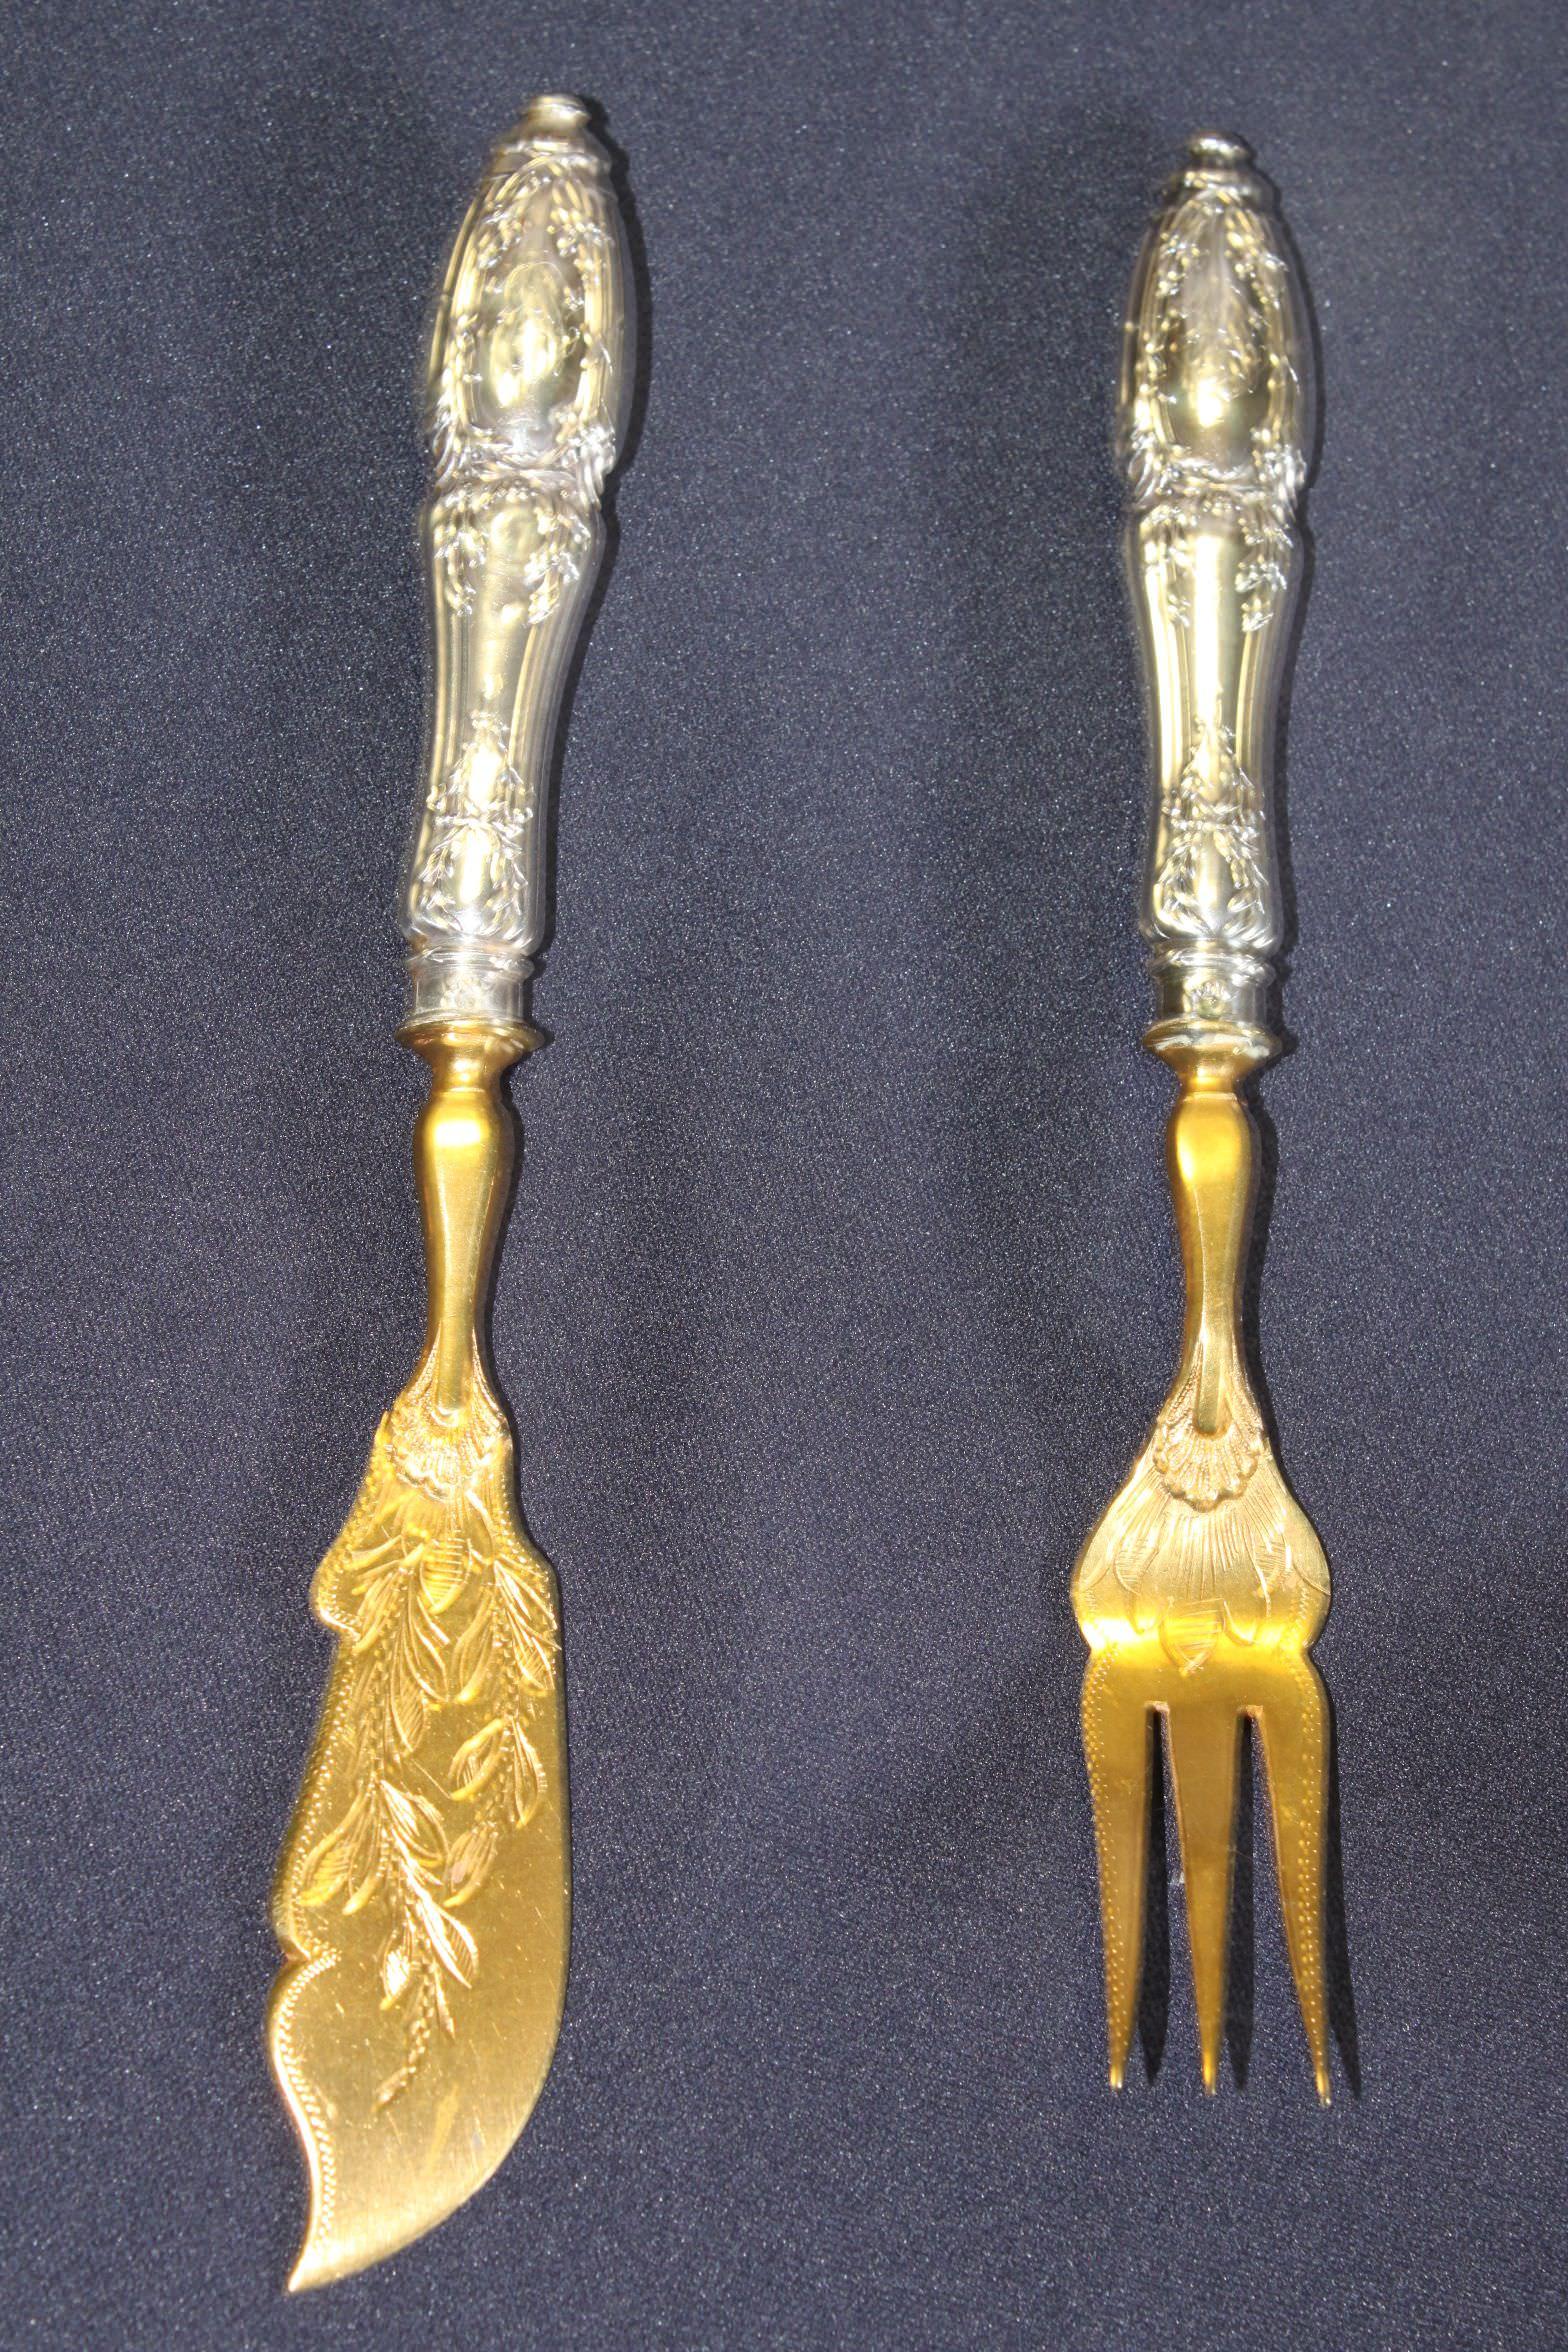 This good quality silver gilt hors d'oeuvres set consists of a sardine fork, a butter knife, a pate server and an olive spoon. The silver handles are embossed with neo-classical wreaths and the blades have been engraved prior to gilding. Each of the